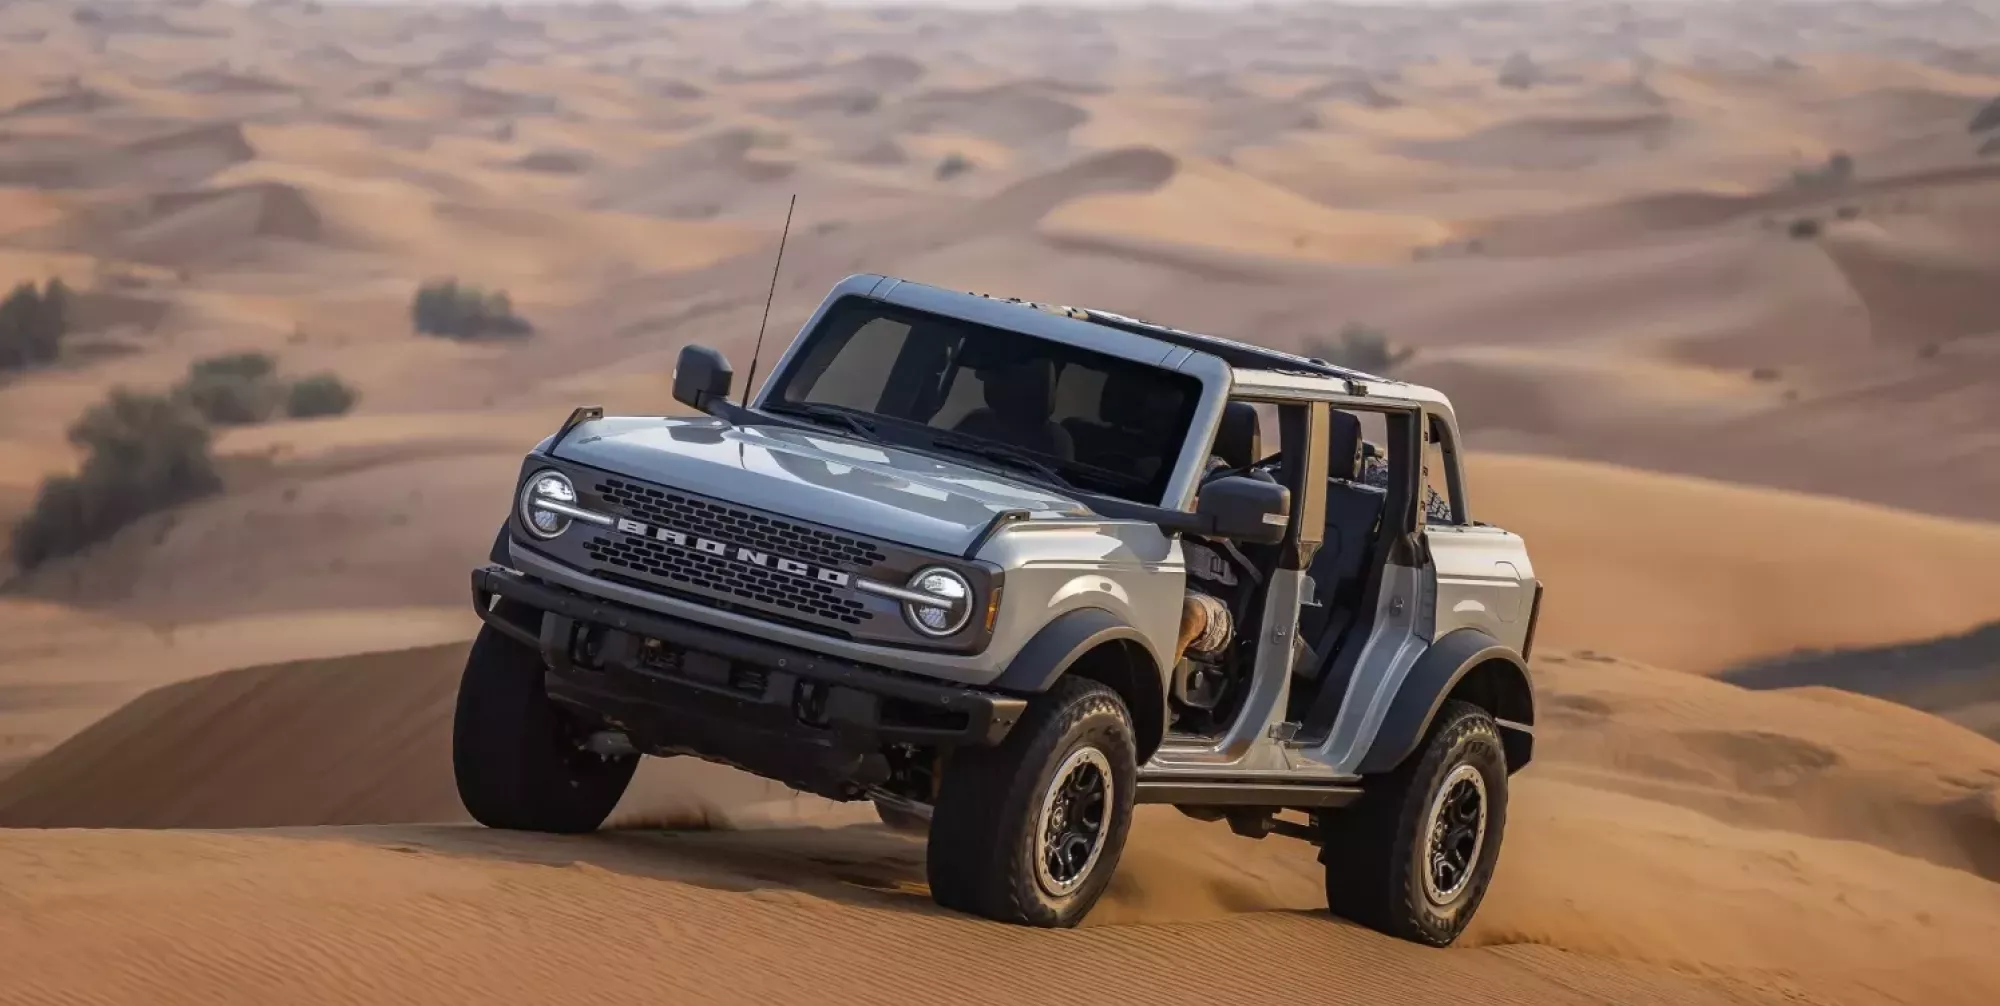 How to Save Fuel and Enjoy Off-Roading A Comprehensive Guide for Middle Eastern Travelers